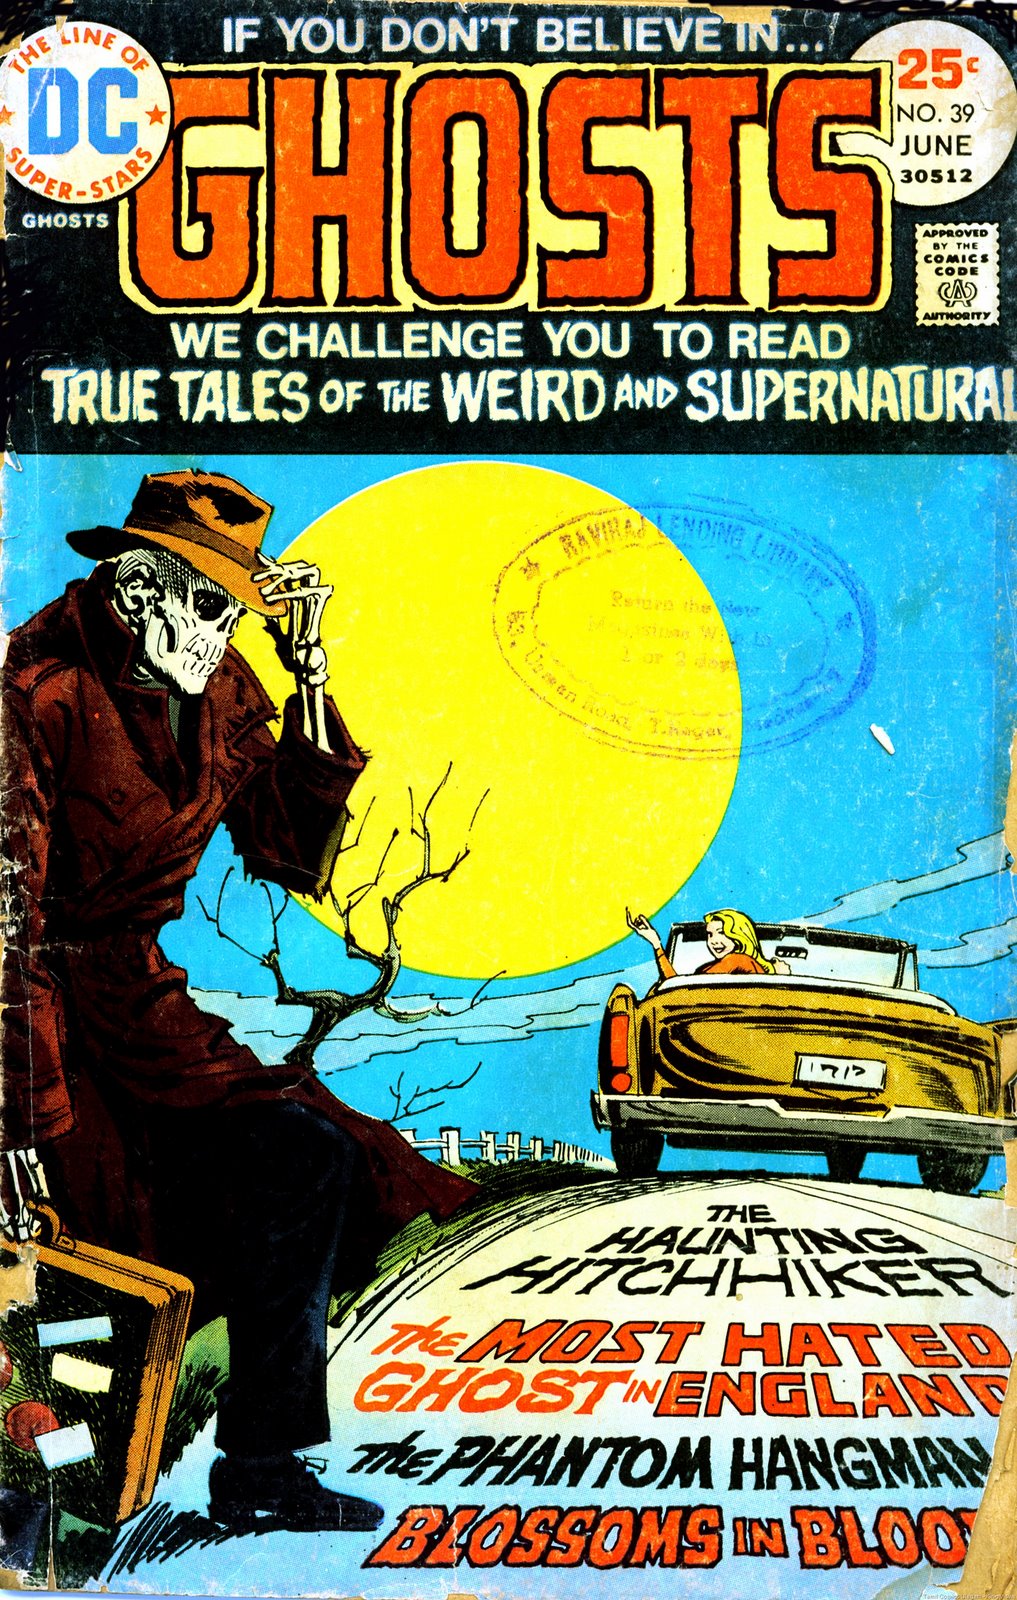 [DC Ghosts Issue No 39 June 1975 Cover[5].jpg]